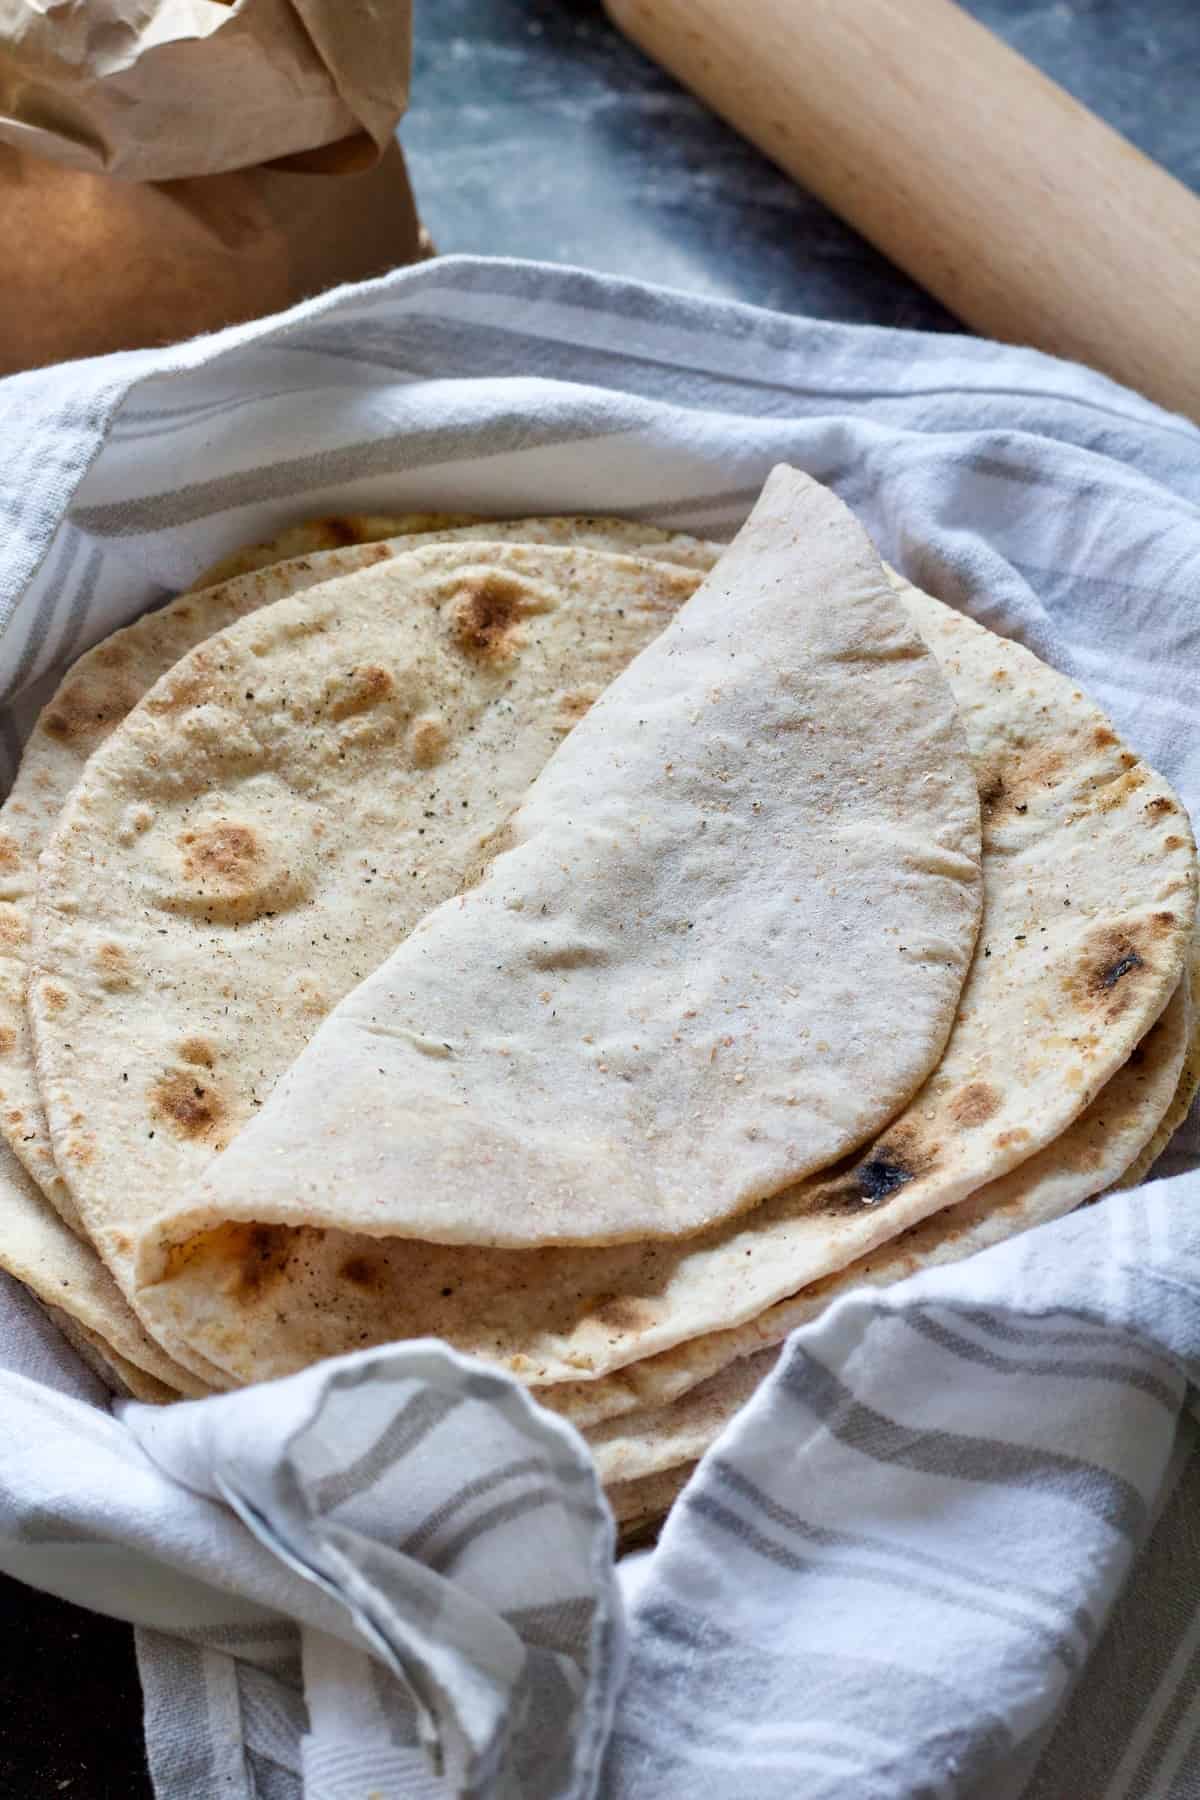 Pile of chapatis with top one folded over.